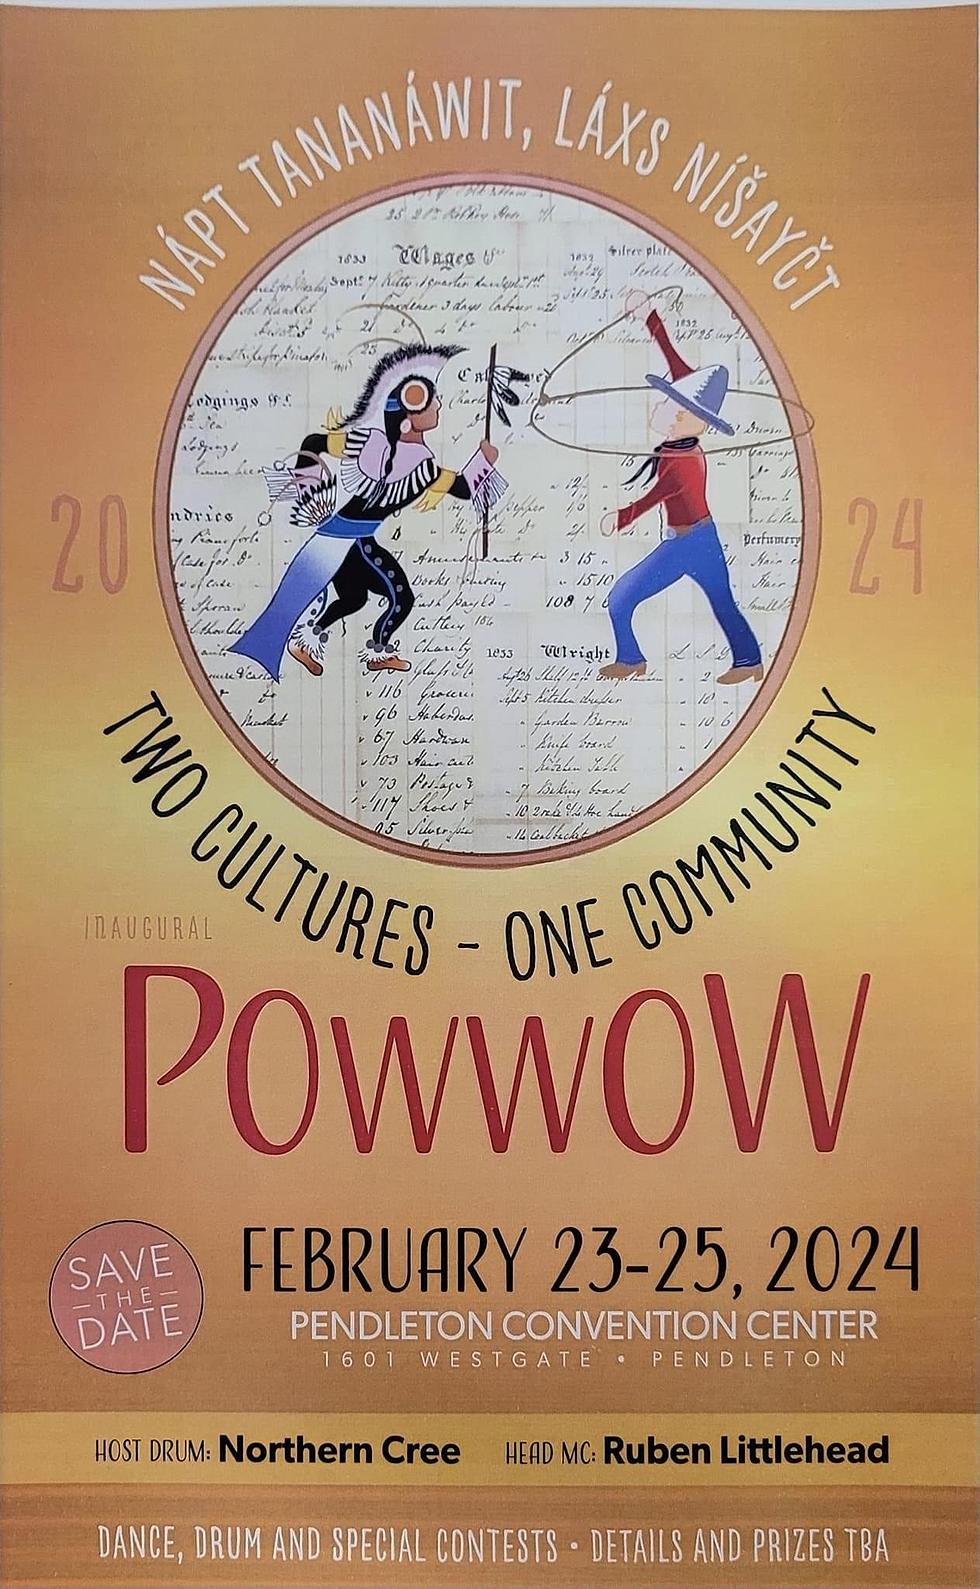 Grammy Nominated Performer to Appear in Pendleton this Weekend at Powwow